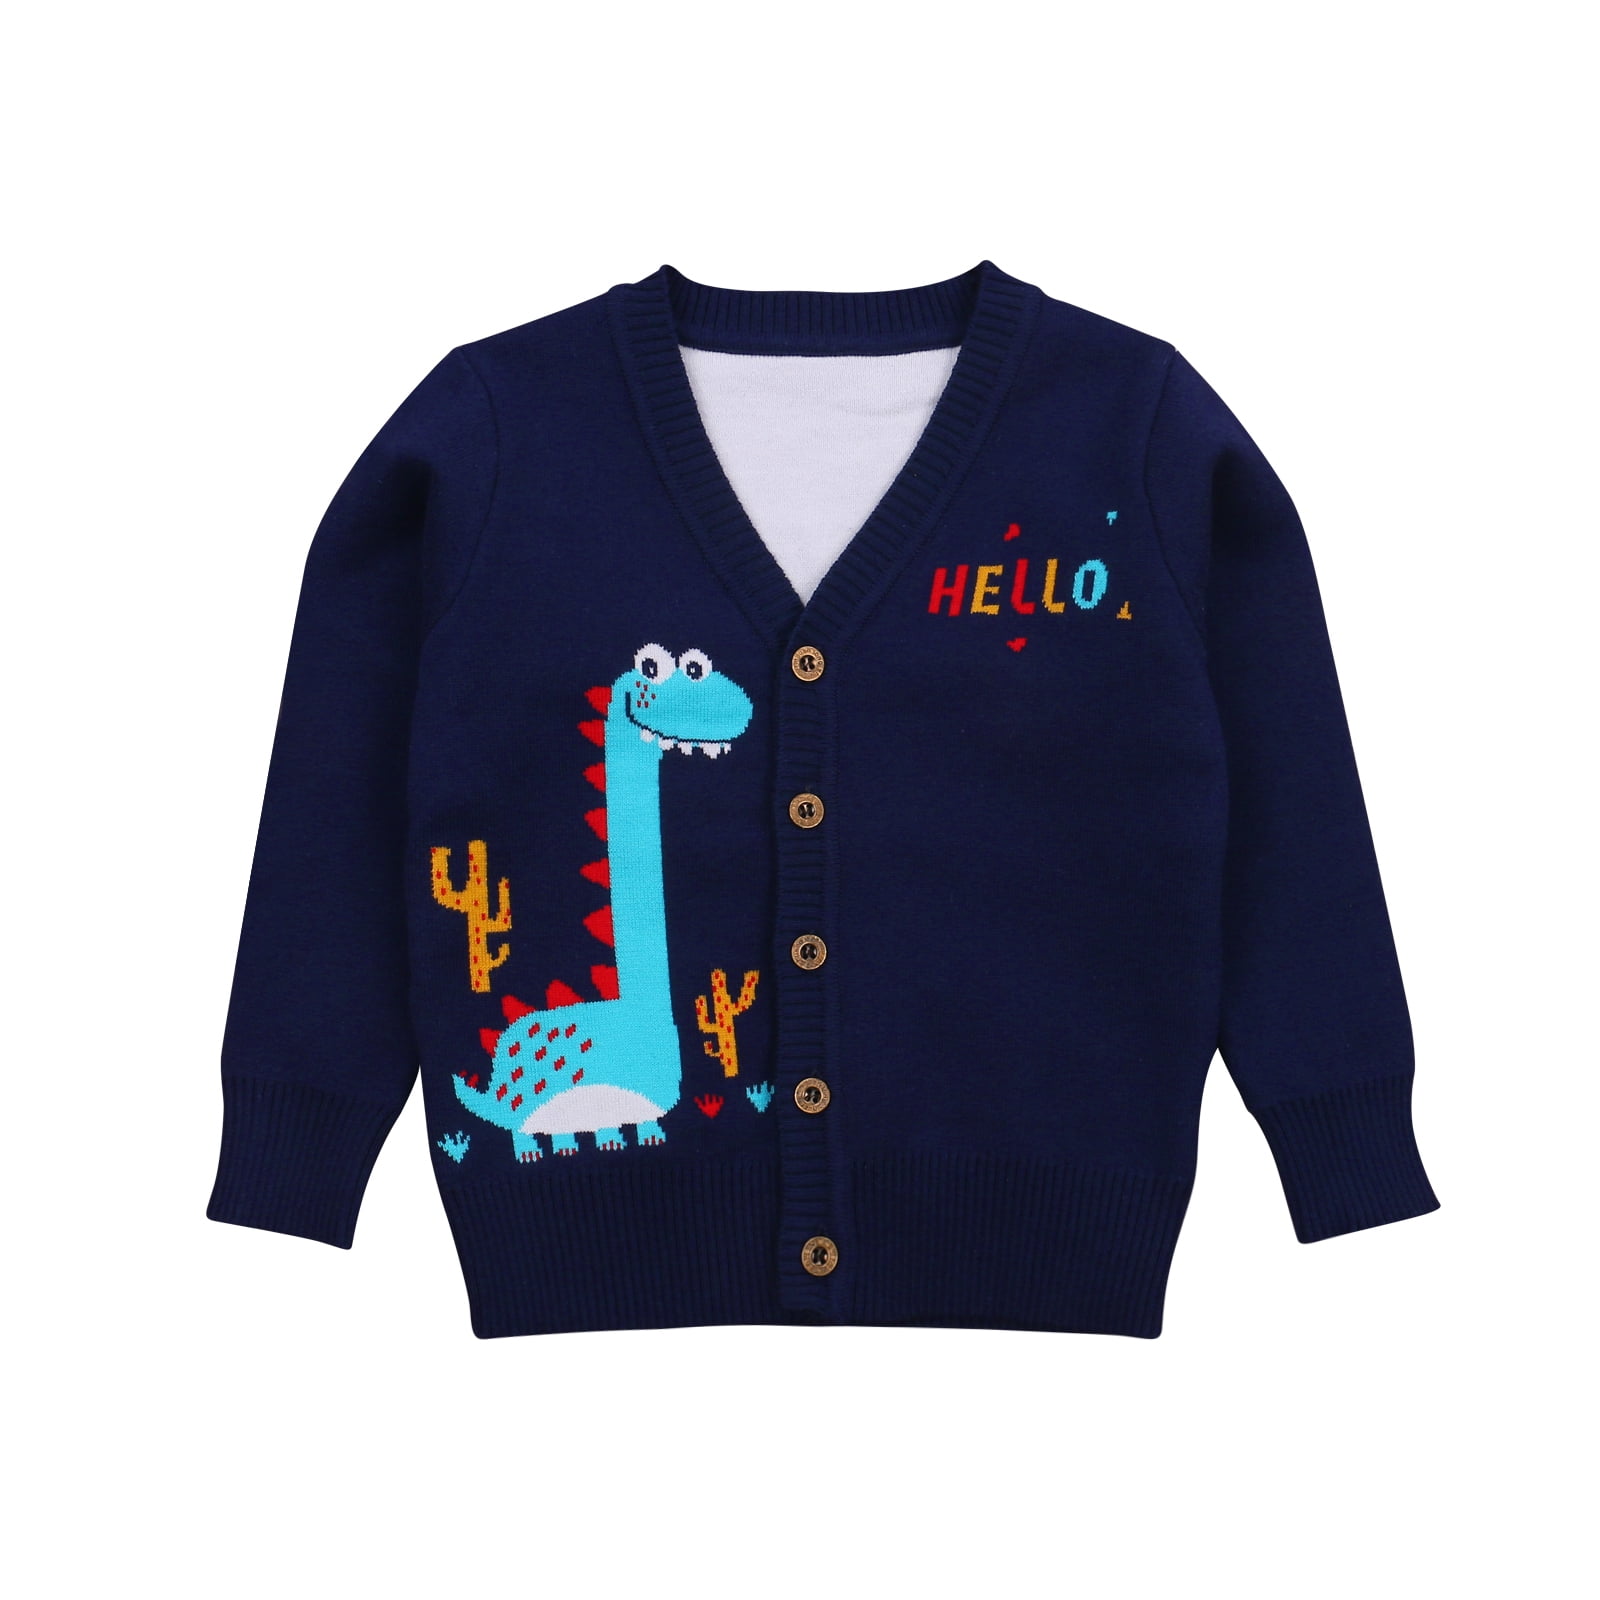 Happy Cherry Unisex Baby Knitted Cardigan Cartoon Sweaters V Neck & Button Knitwear Long Sleeve for Autumn Dinosaur 2-7 X 